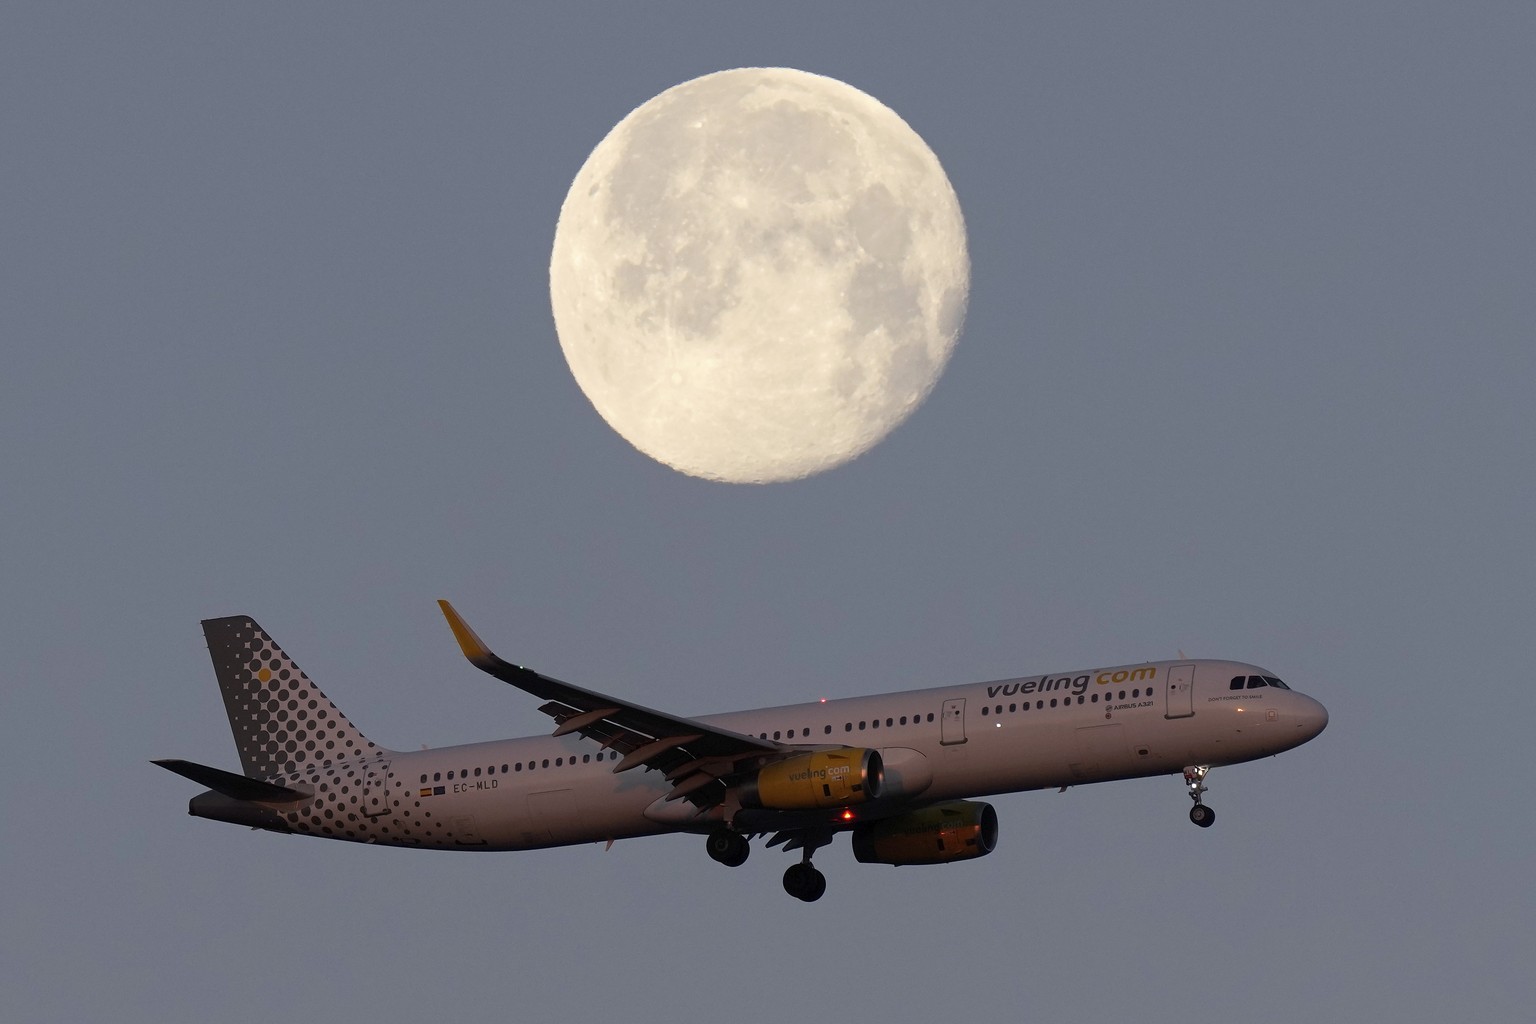 A Vueling Airbus A321 approaches for landing in Lisbon at sunrise, with the moon in the background, Tuesday, Feb. 7, 2023. (AP Photo/Armando Franca)